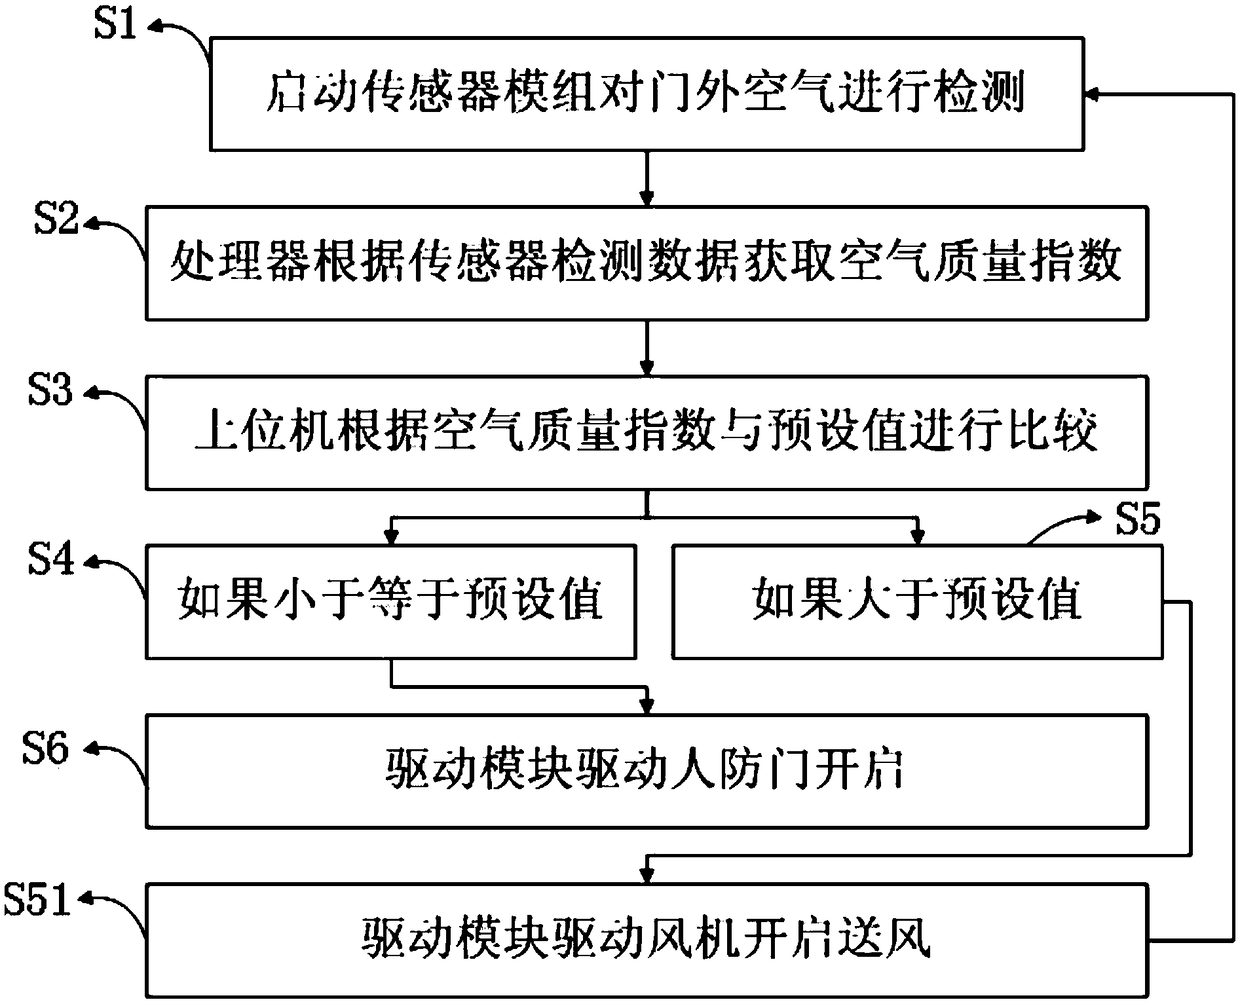 On-line monitoring control system and method for external environment of civil air defense door